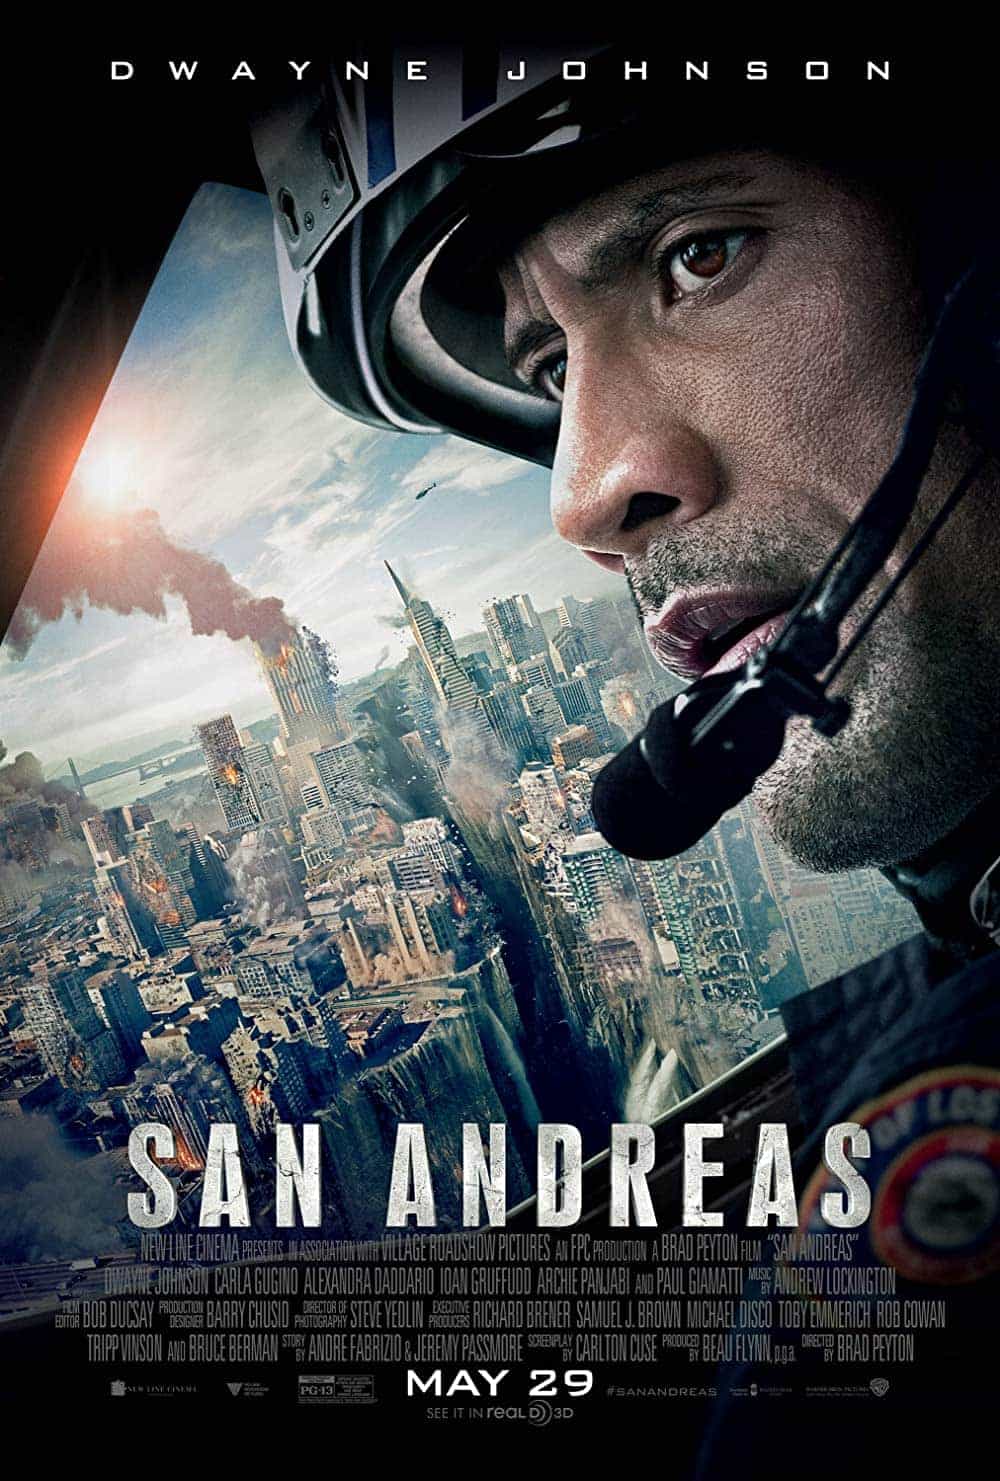 San Andreas (2015) Best Tsunami Movies to Add in Your Watchlist